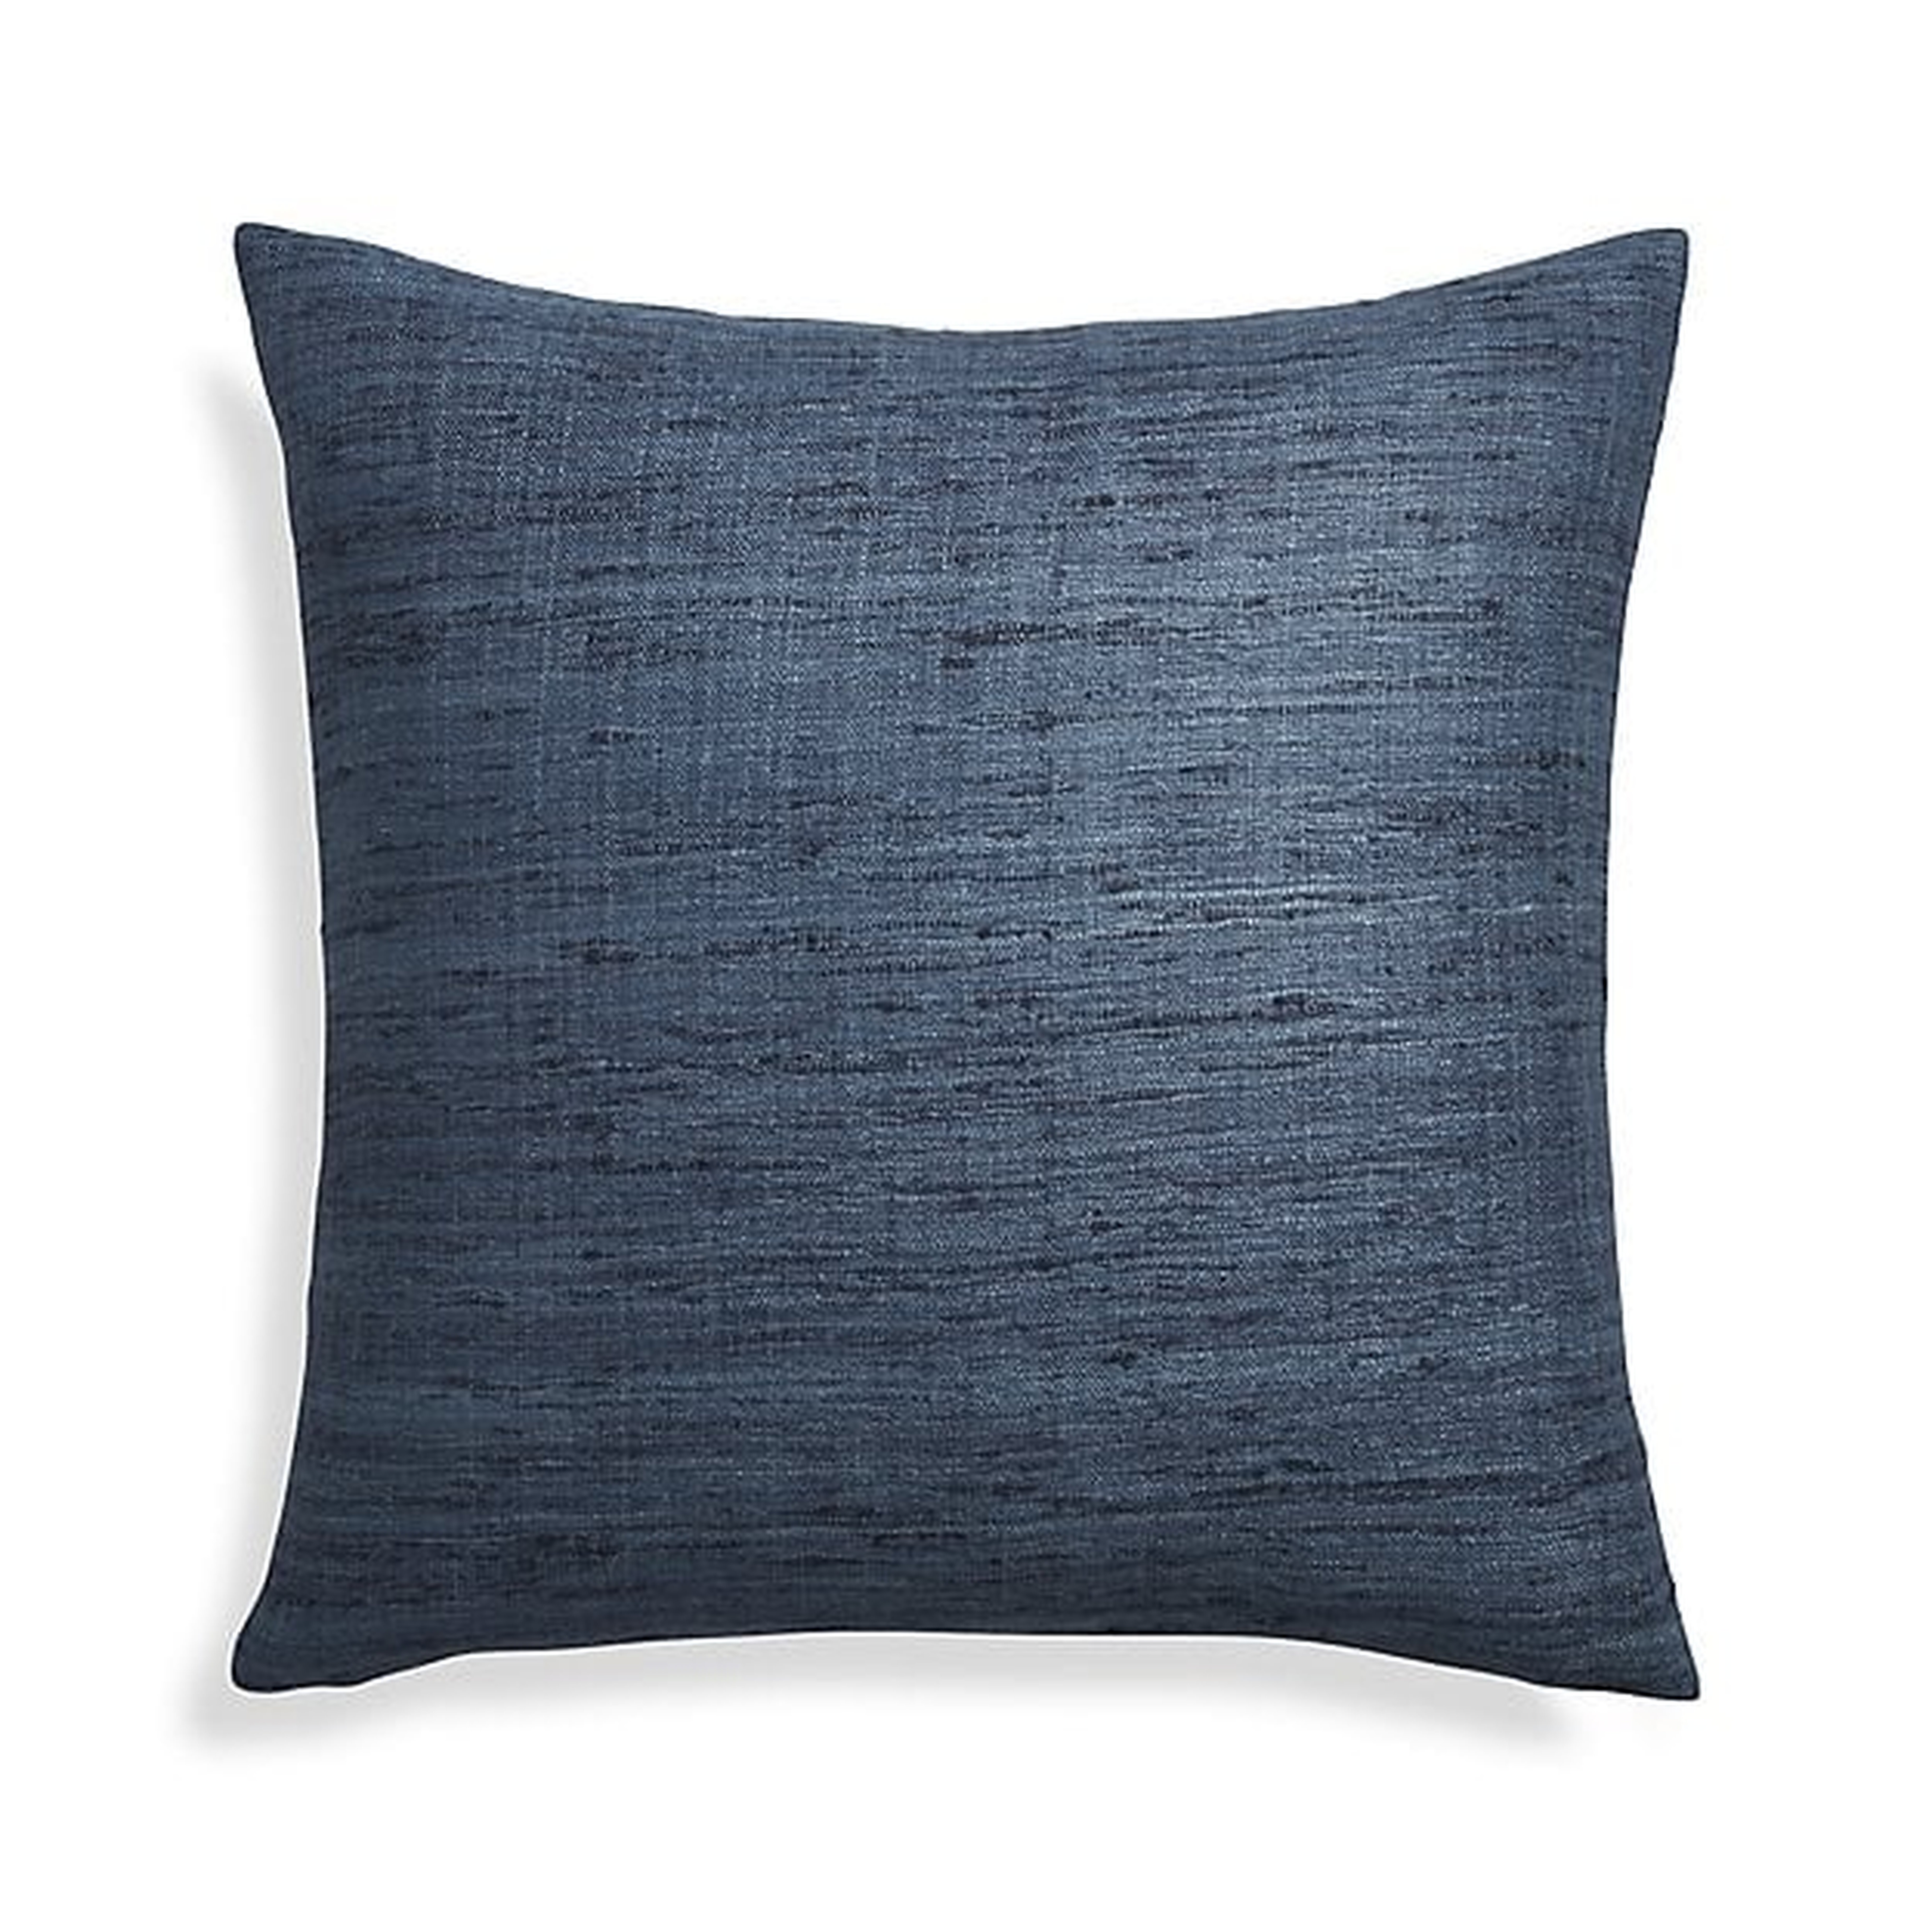 Trevino Delfe Blue 20" Pillow with Feather-Down Insert - Crate and Barrel